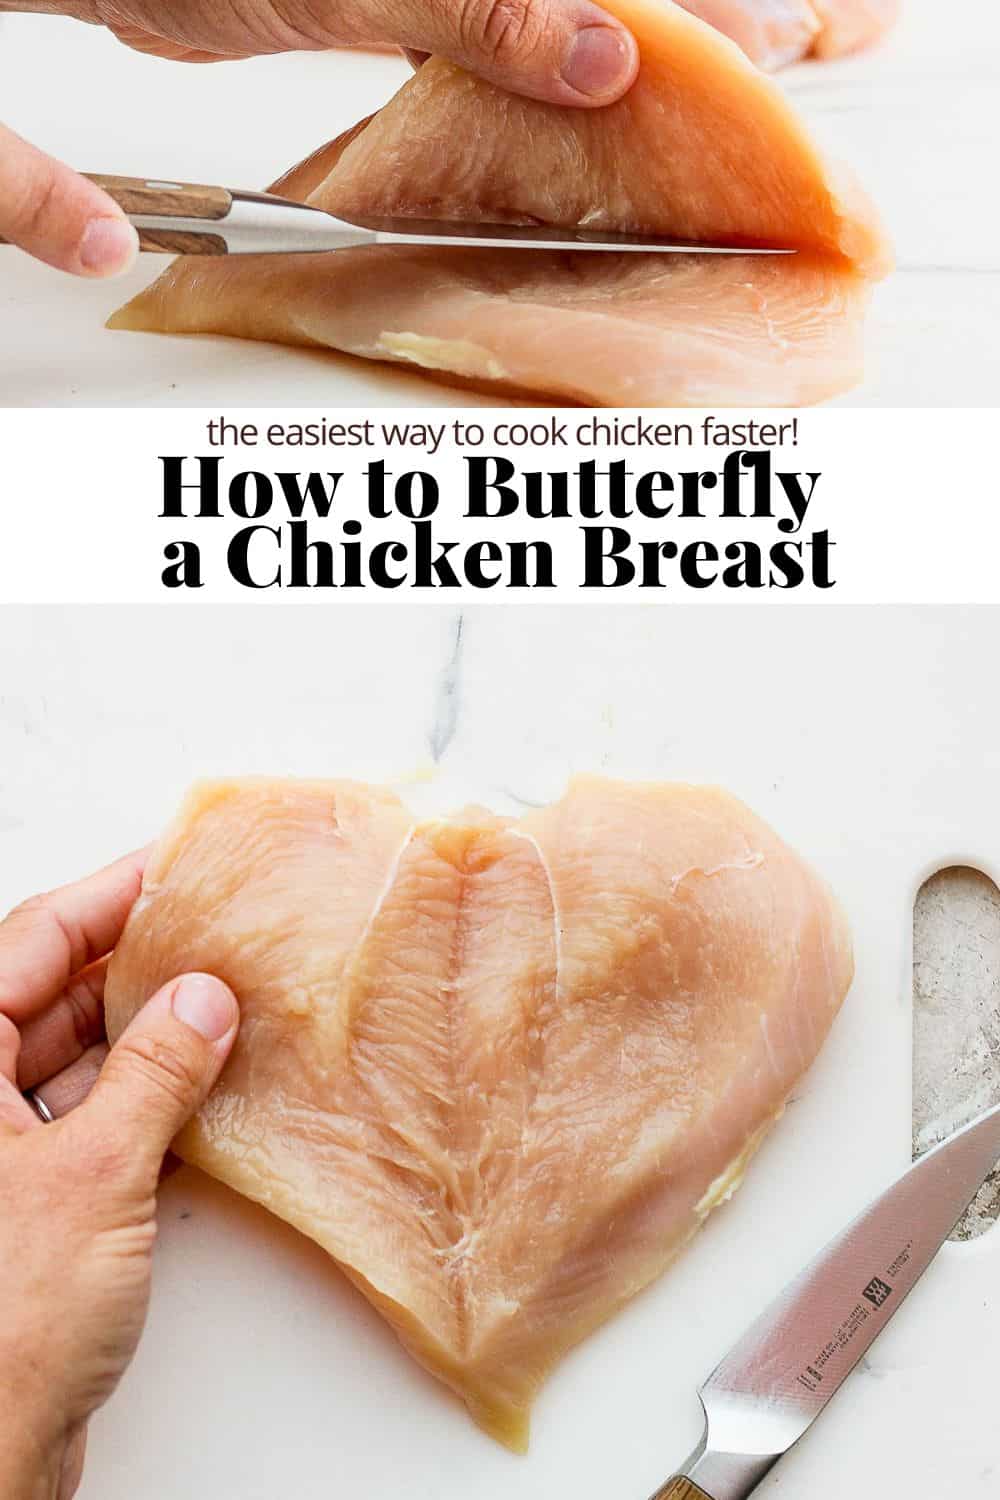 Pinterest image of a person cutting through a chicken breast, the recipe title, and then a fully butterflied chicken breast on the bottom. 